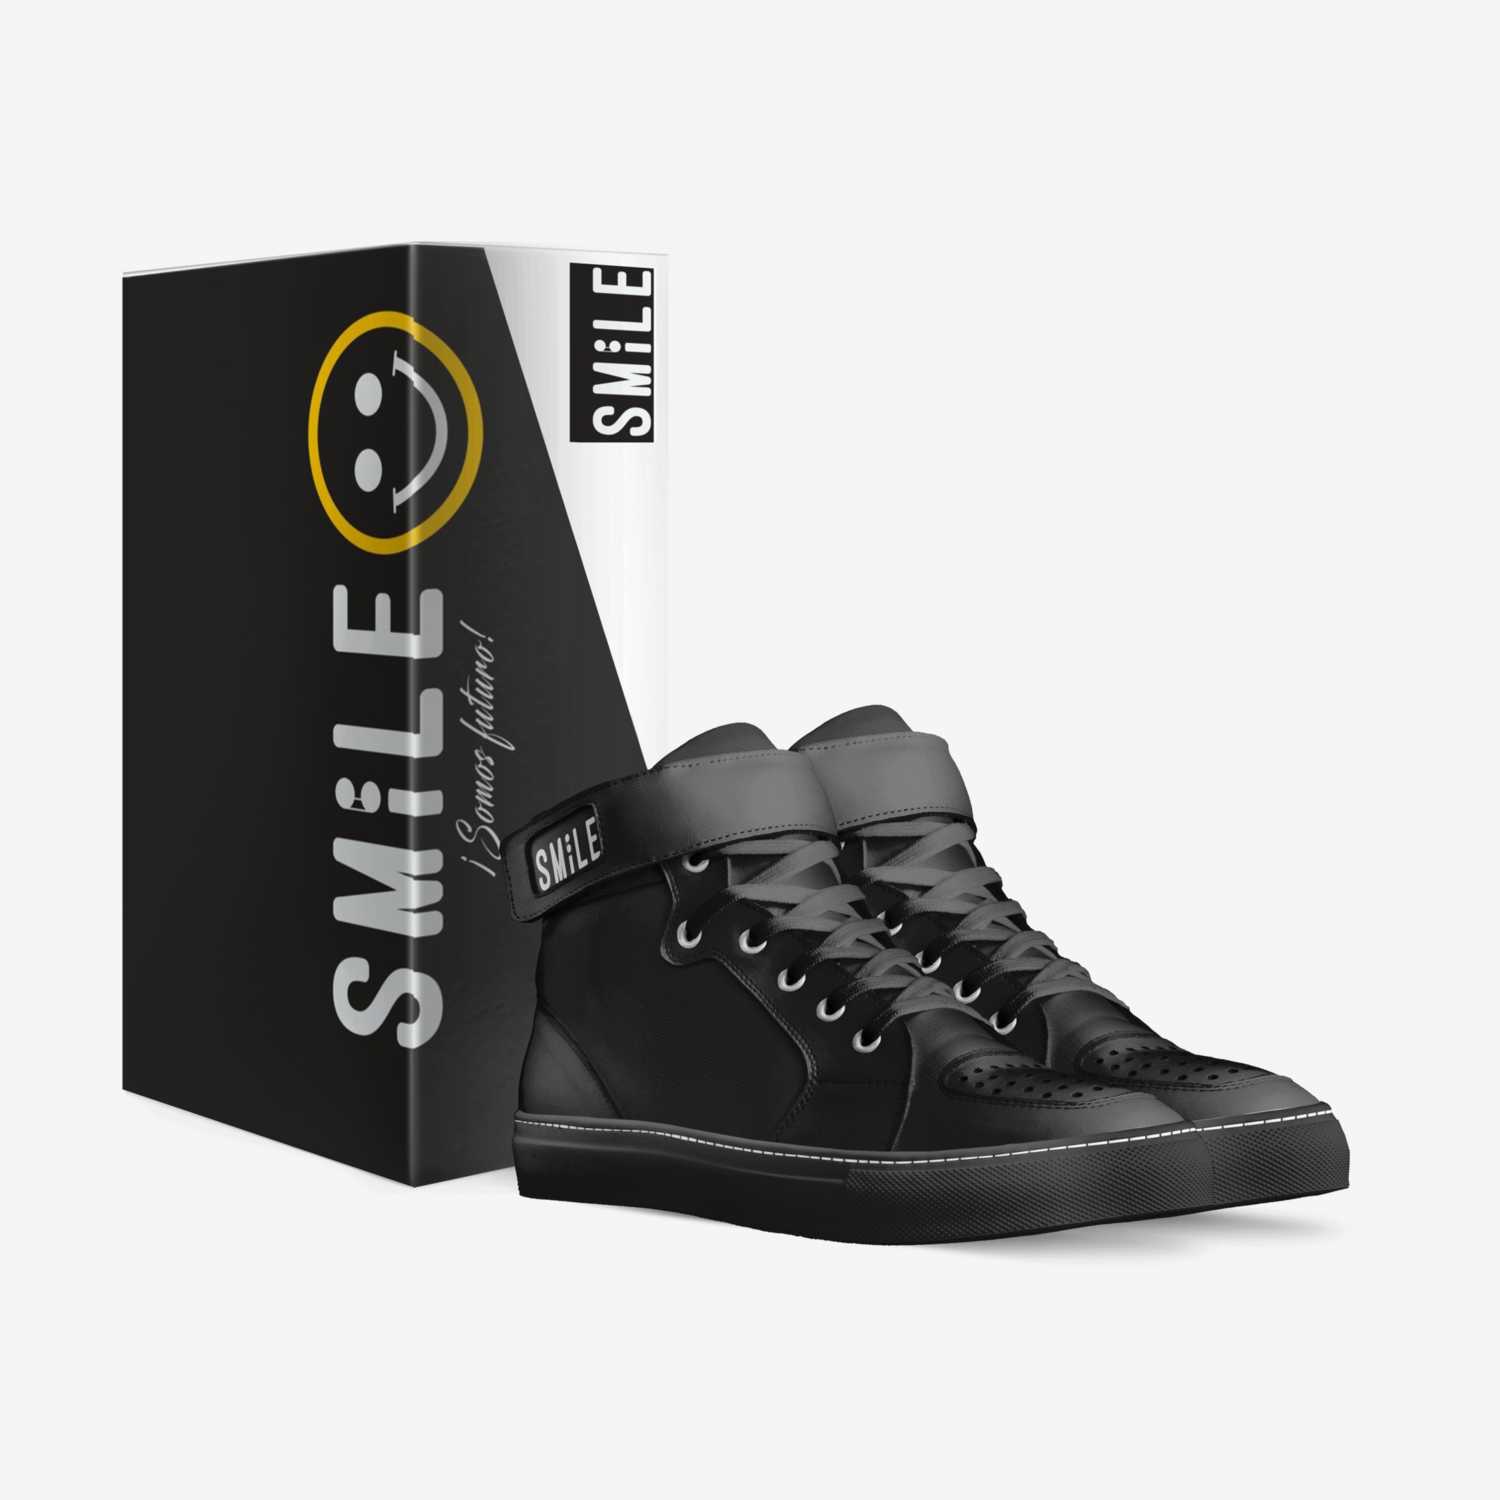 Smile site shoes  custom made in Italy shoes by Rafael Drager | Box view